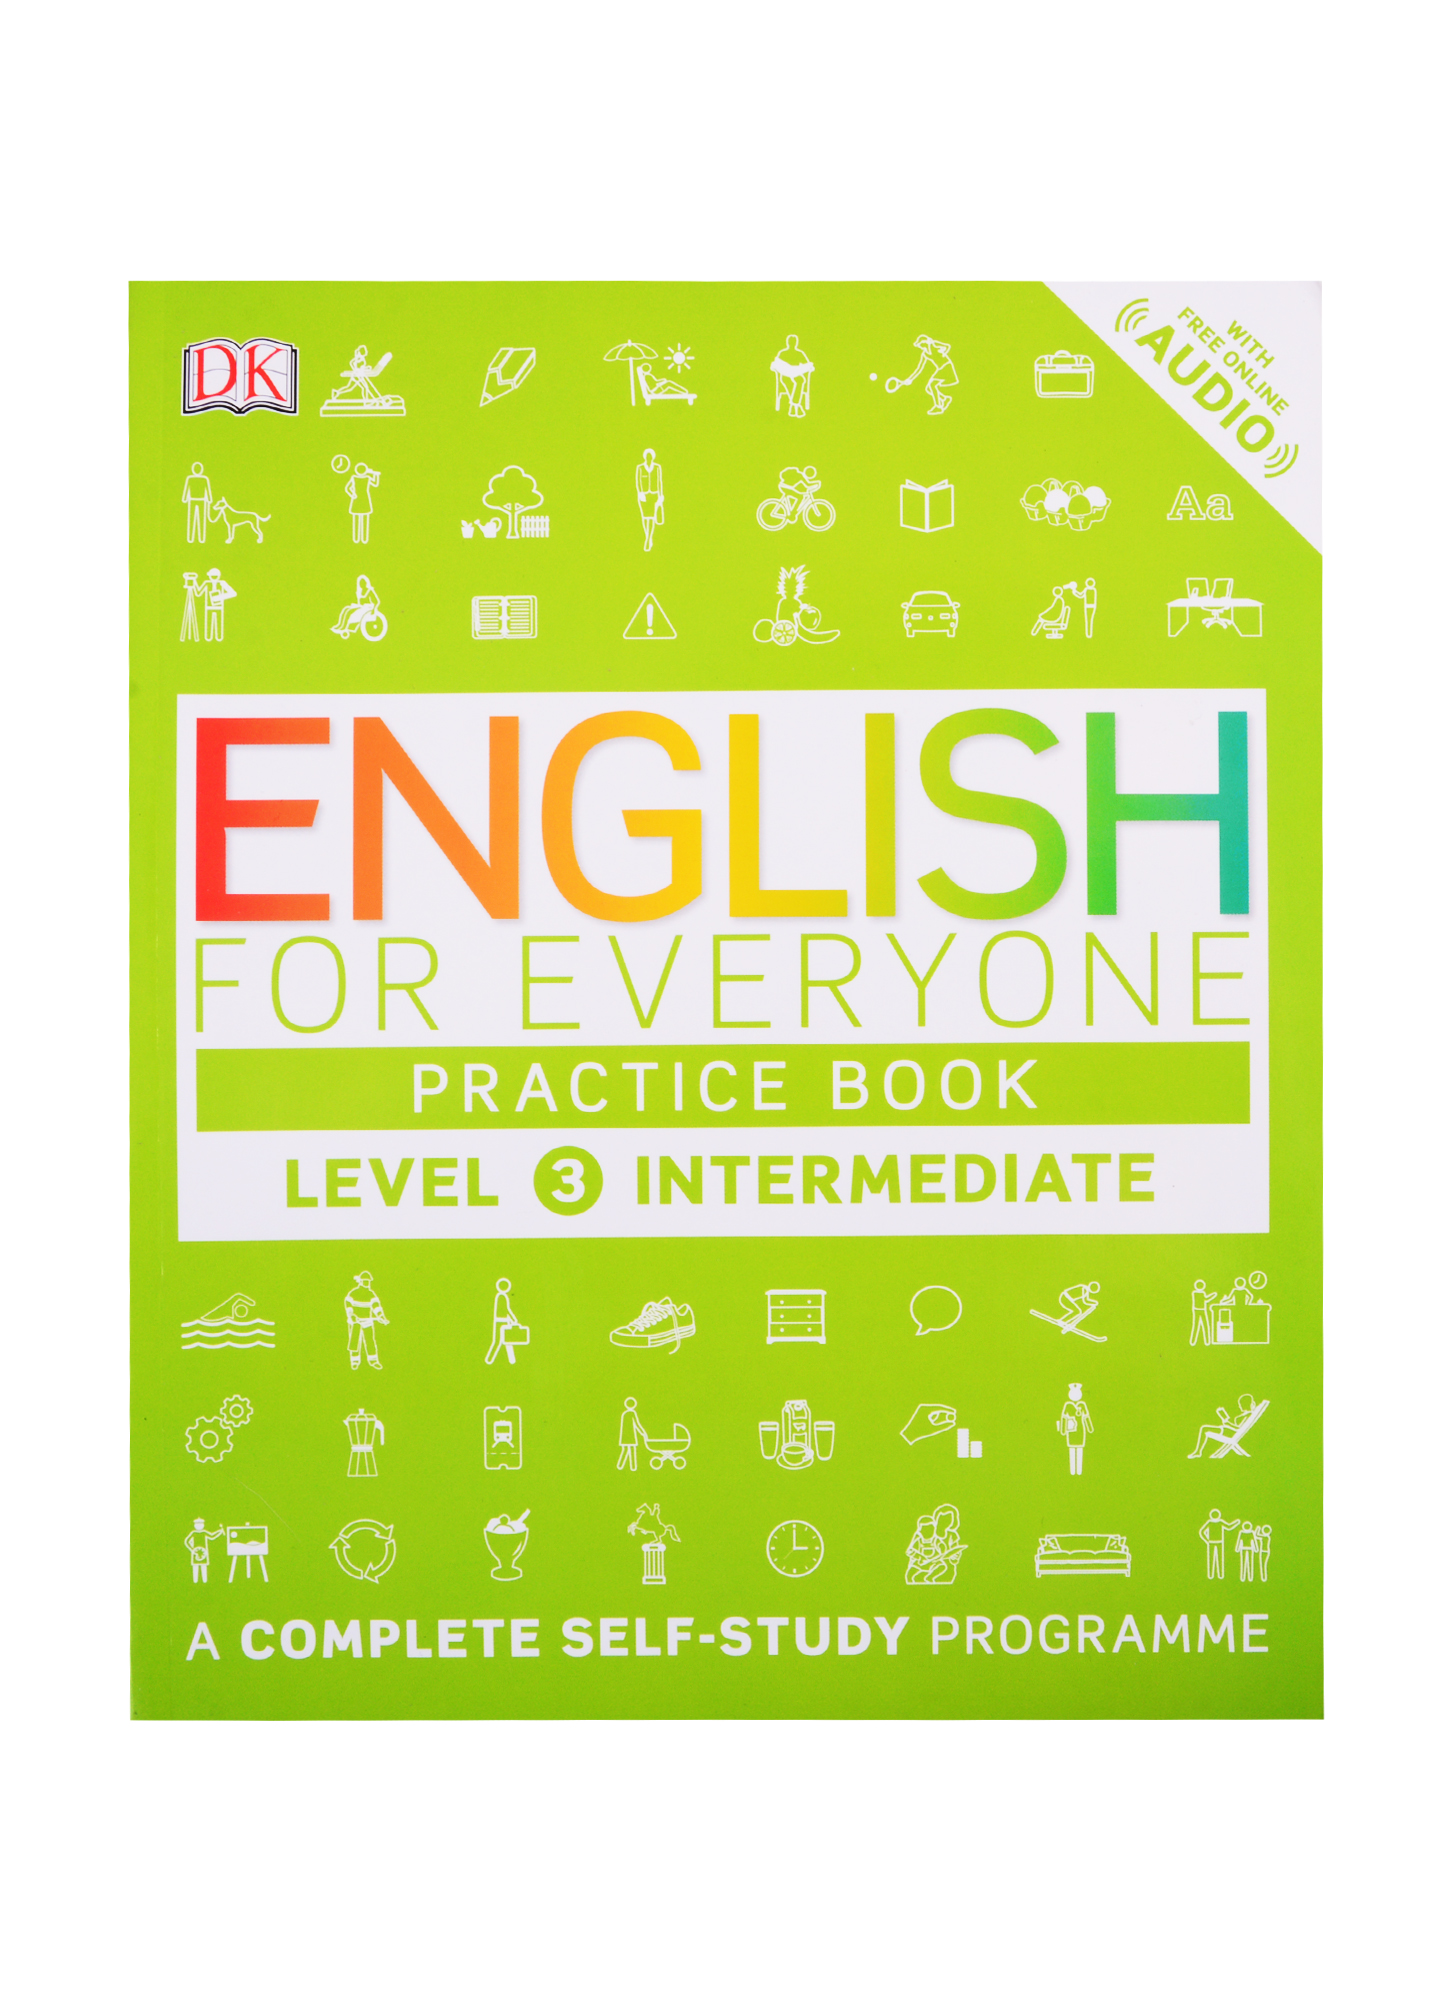 English for Everyone Practice Book Level 3 Intermediate english for everyone english grammar guide